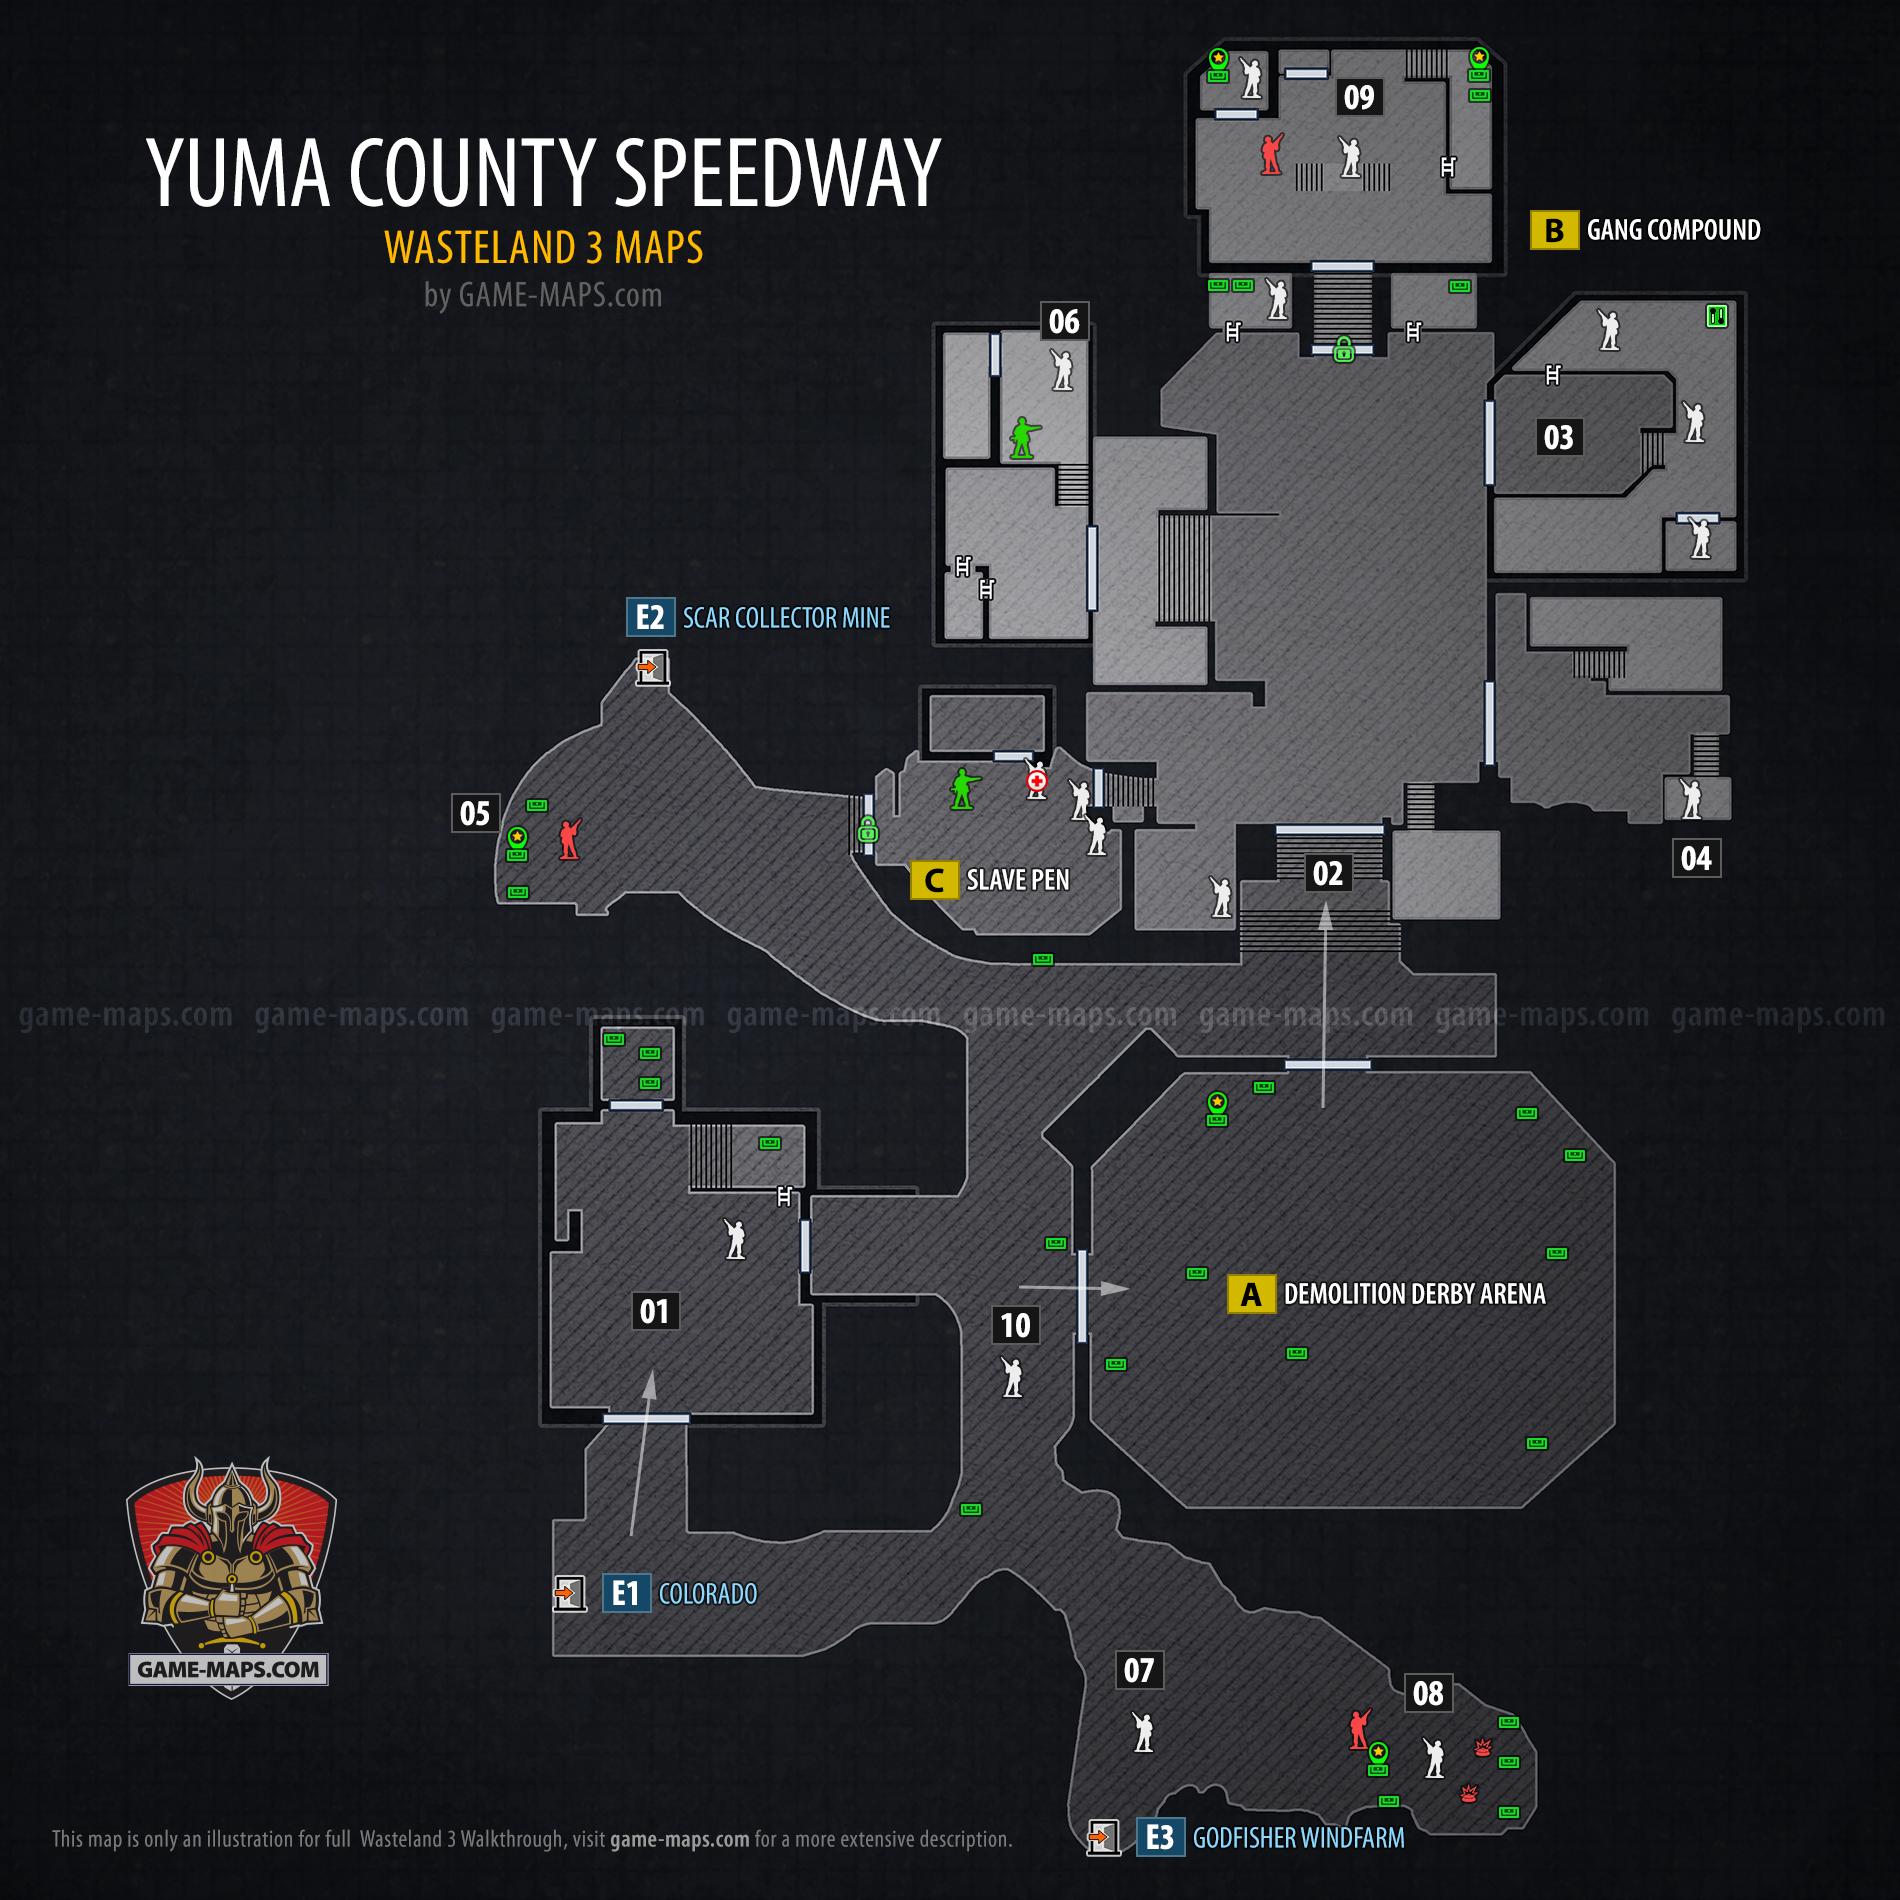 Map of Yuma County Speedway in Wasteland 3